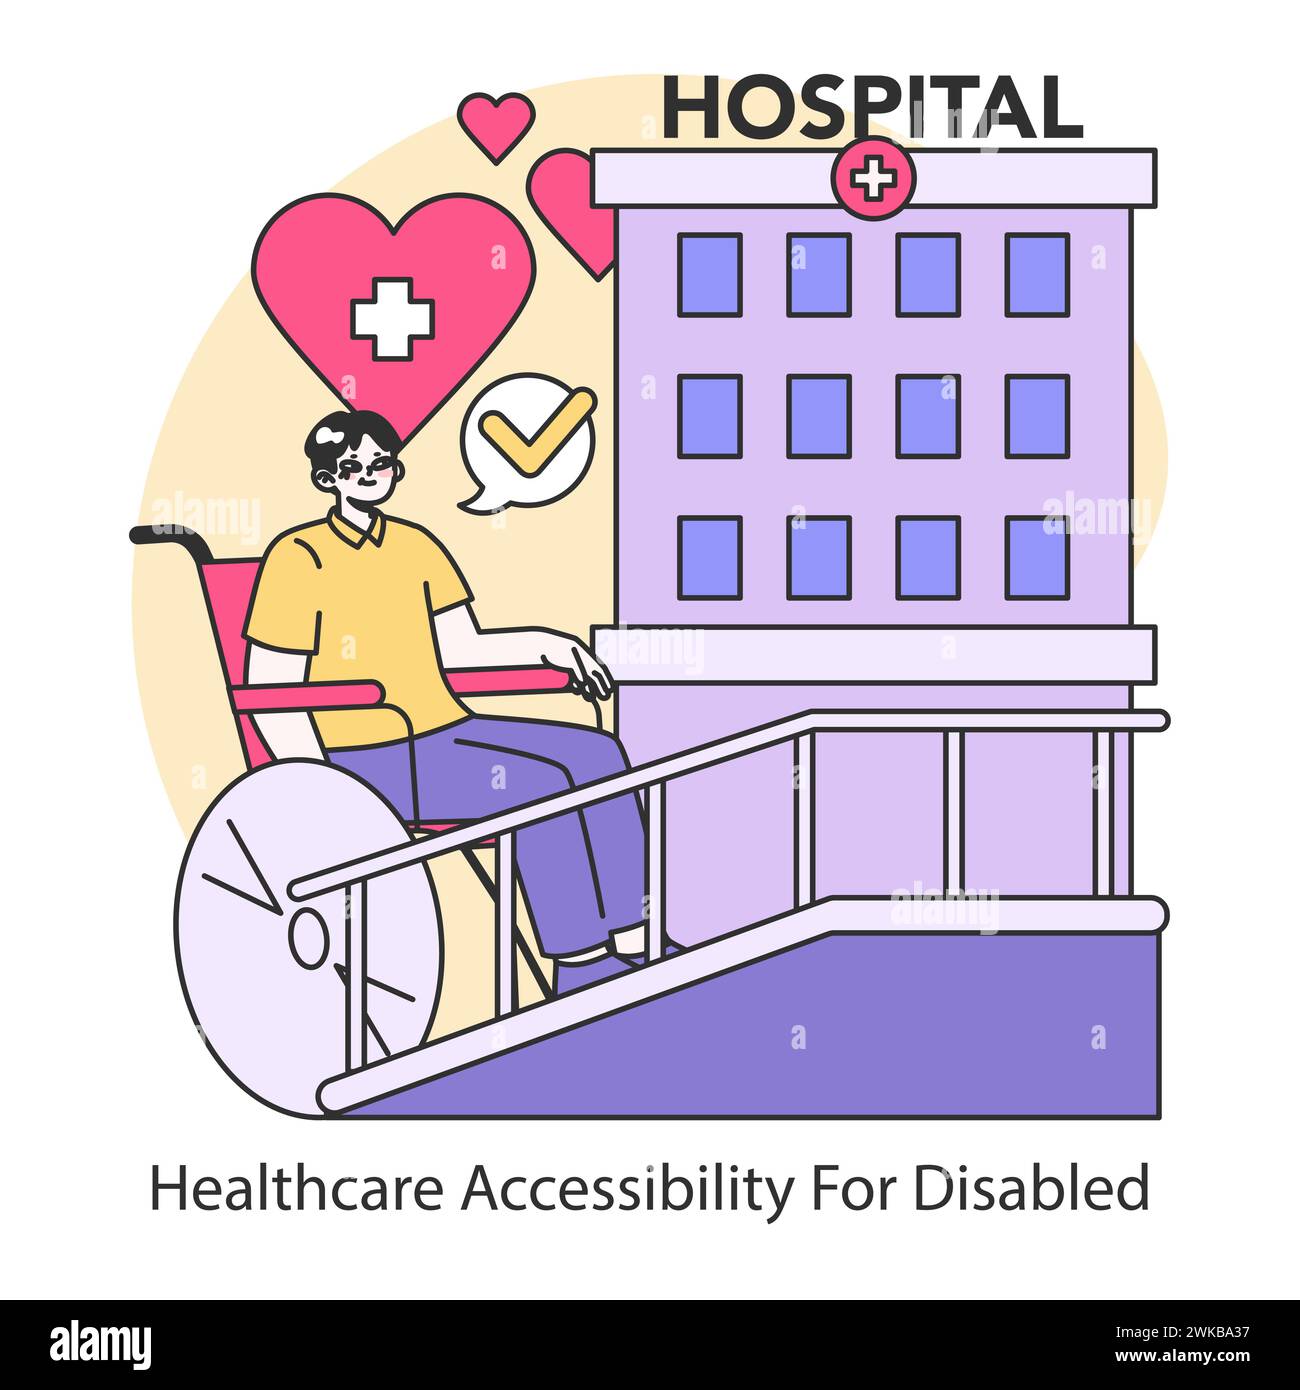 Healthcare Accessibility For Disabled concept. Illustration of an inclusive hospital environment with wheelchair access, symbolizing care for every patient. Flat vector illustration. Stock Vector